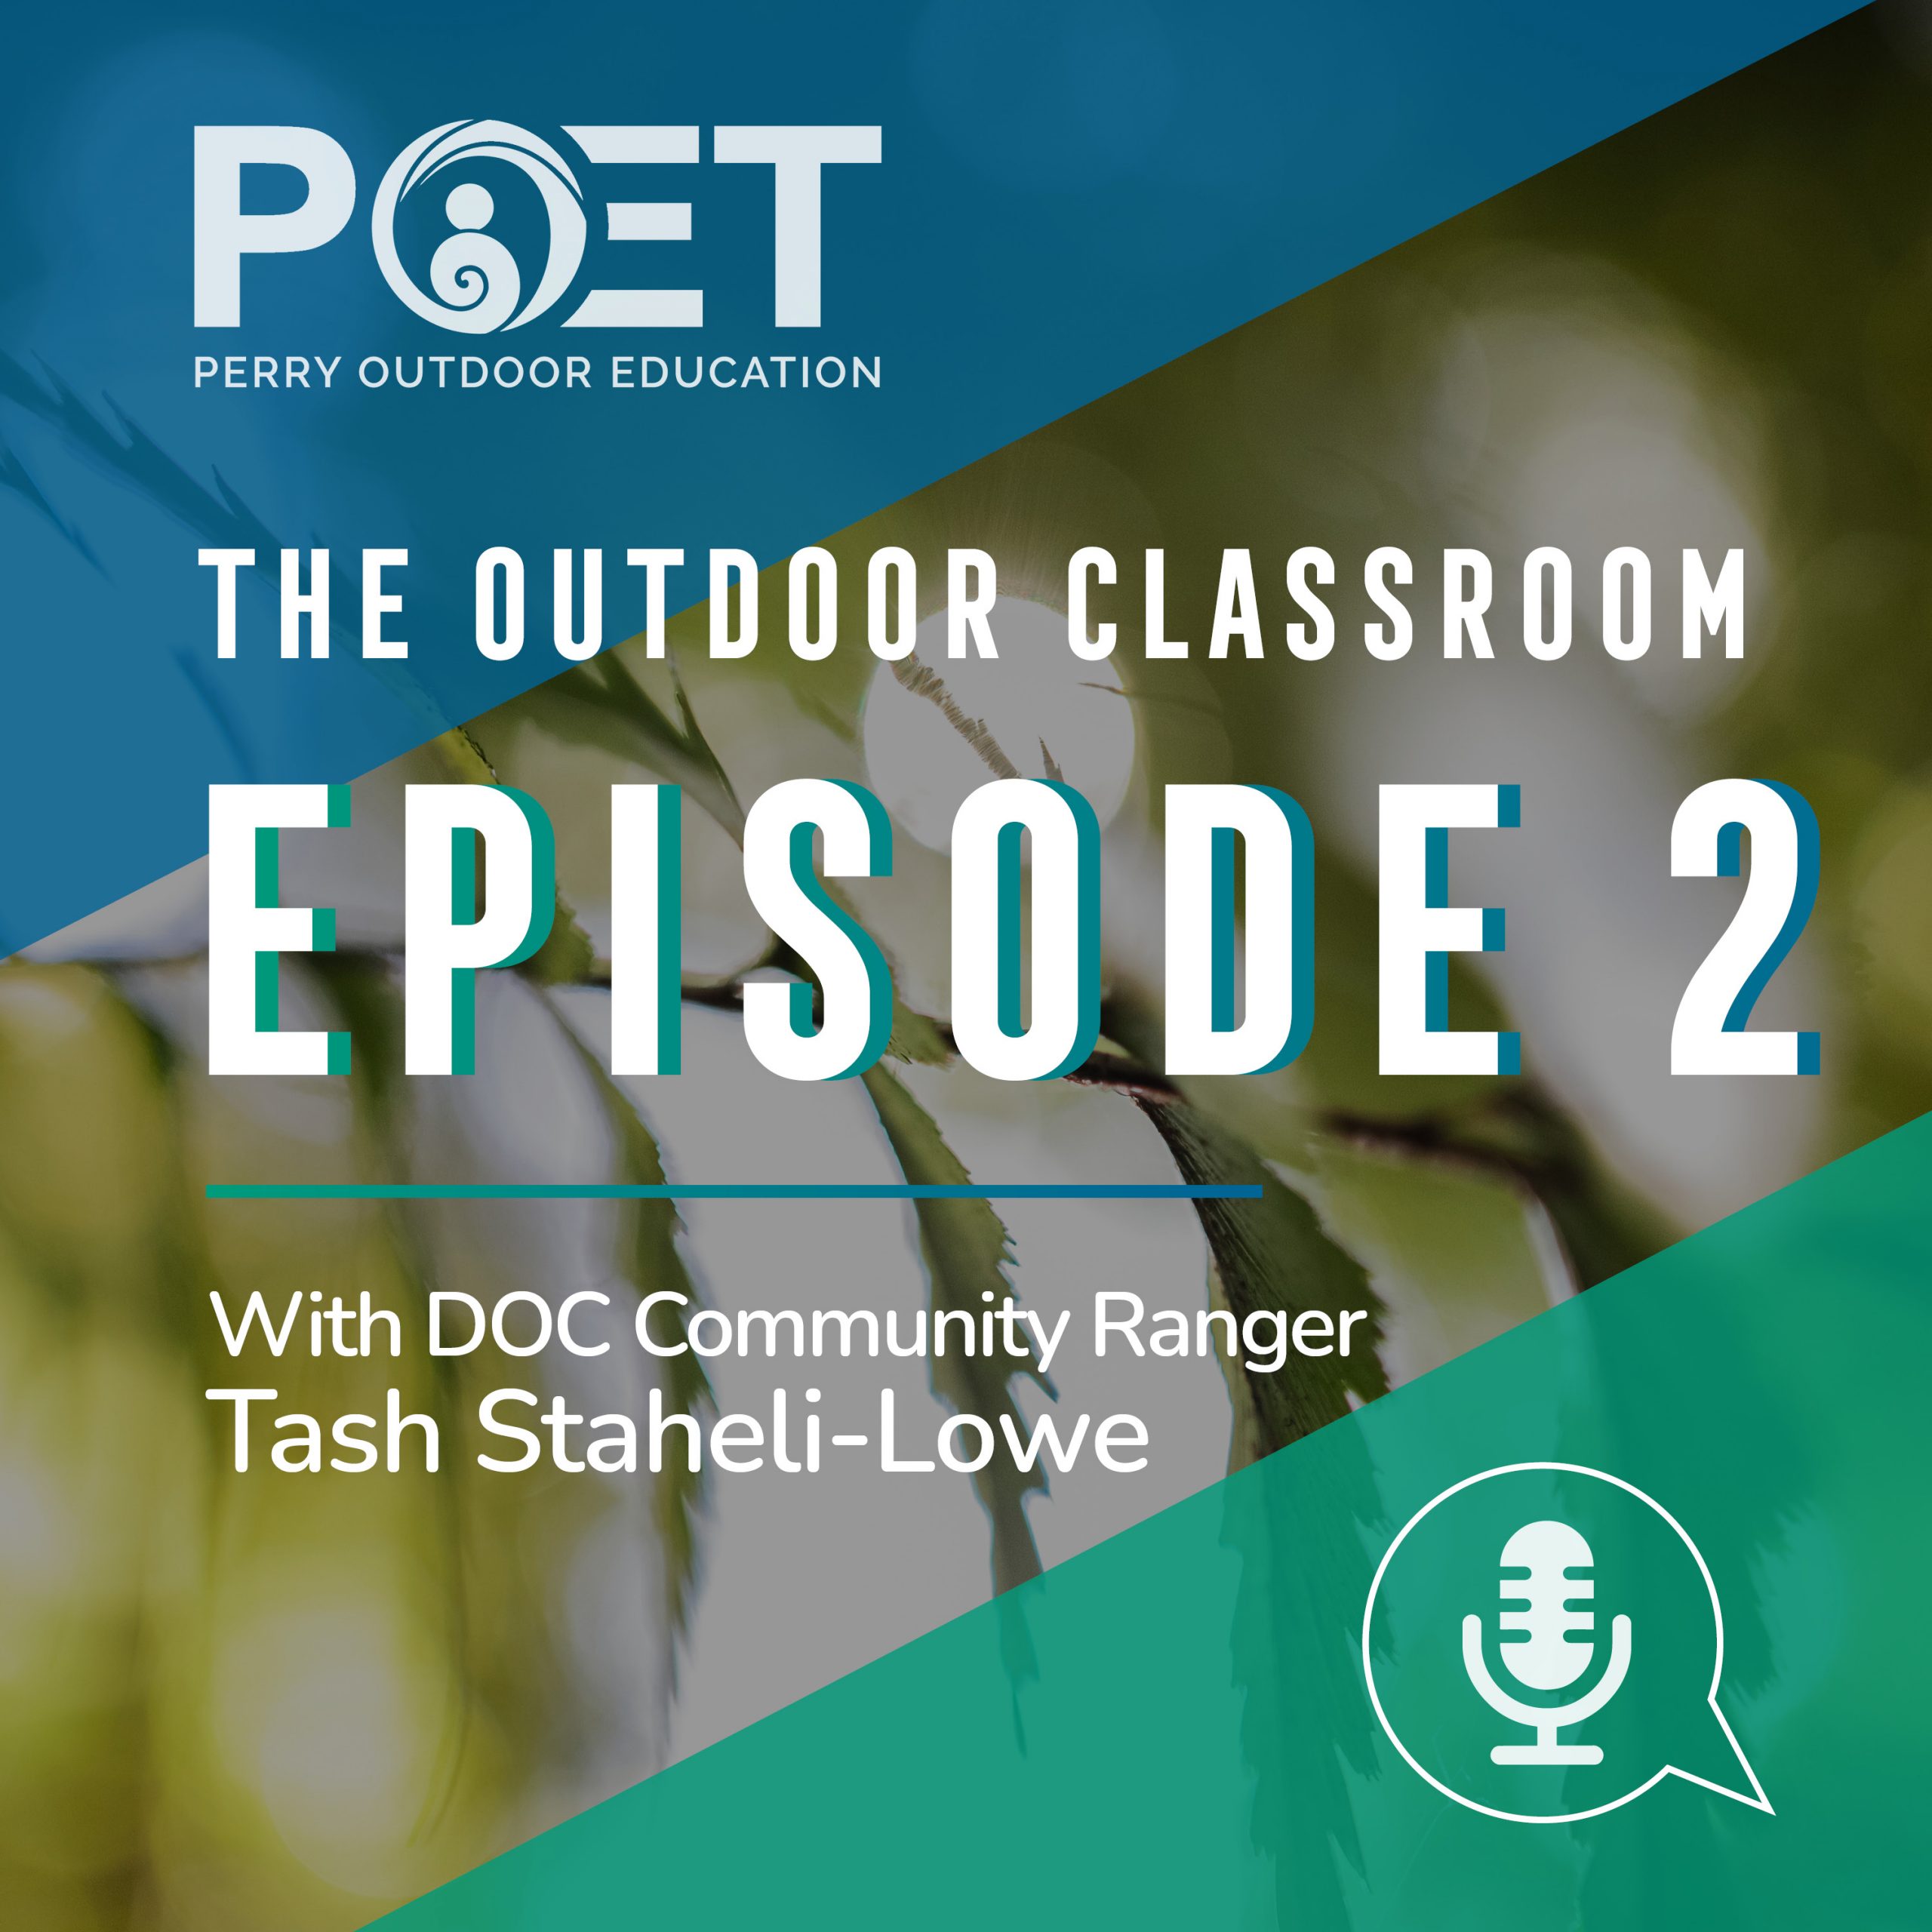 Episode 2 of the Outdoor Classroom podcast